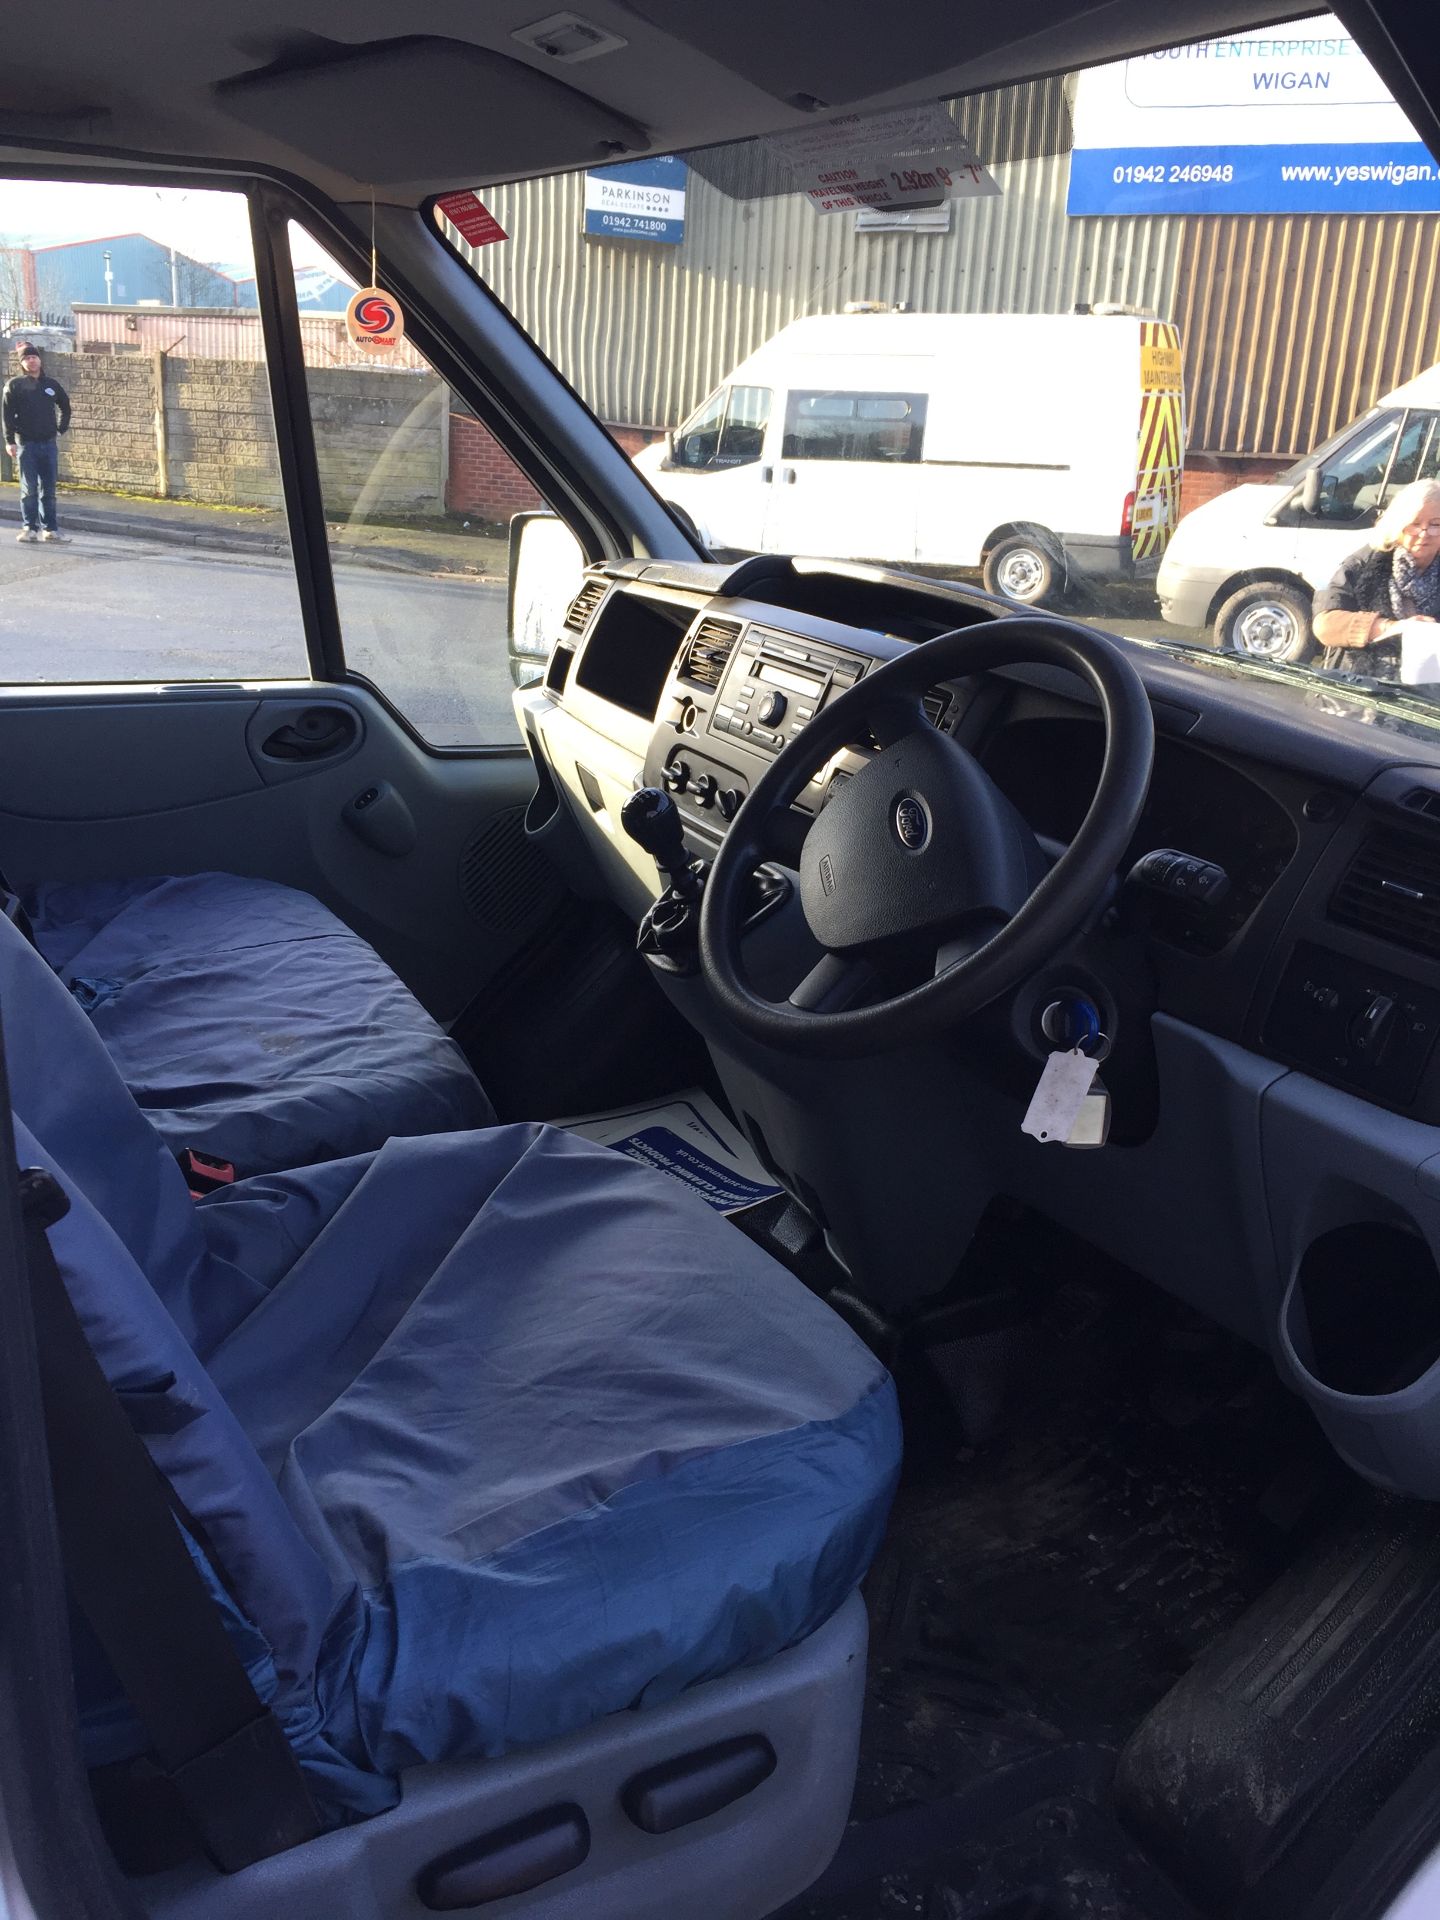 Ford Transit Welfare Van With Seating Area, Cooking Station and Toilet Ex-Commisioned Highway Mainte - Image 8 of 10